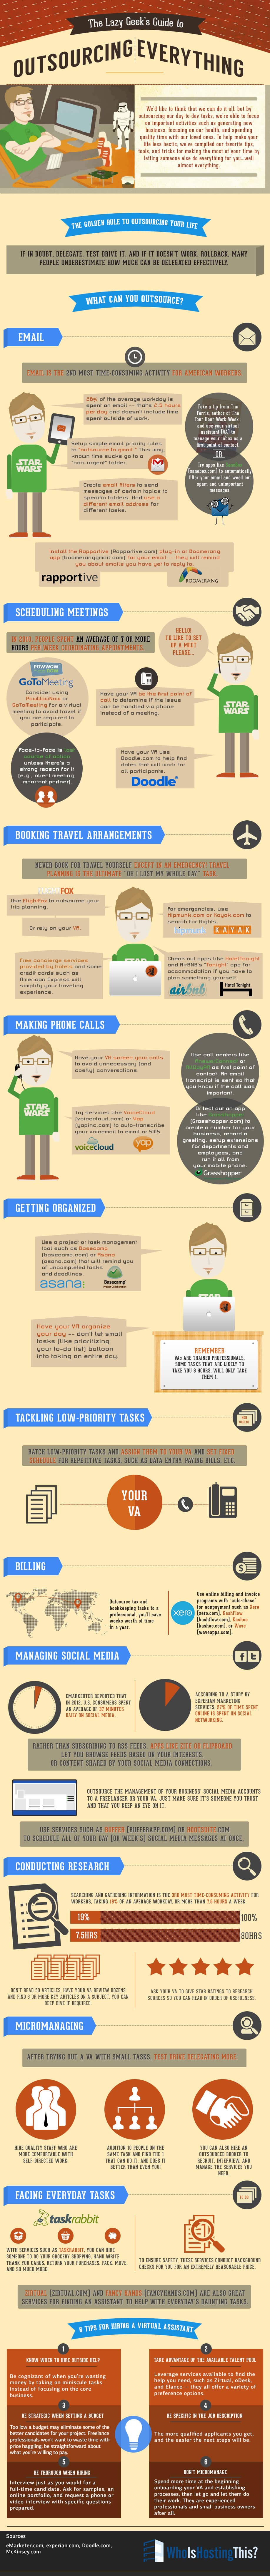 The-Lazy-Geeks-Guide-to-Outsourcing-Everything-Infographic